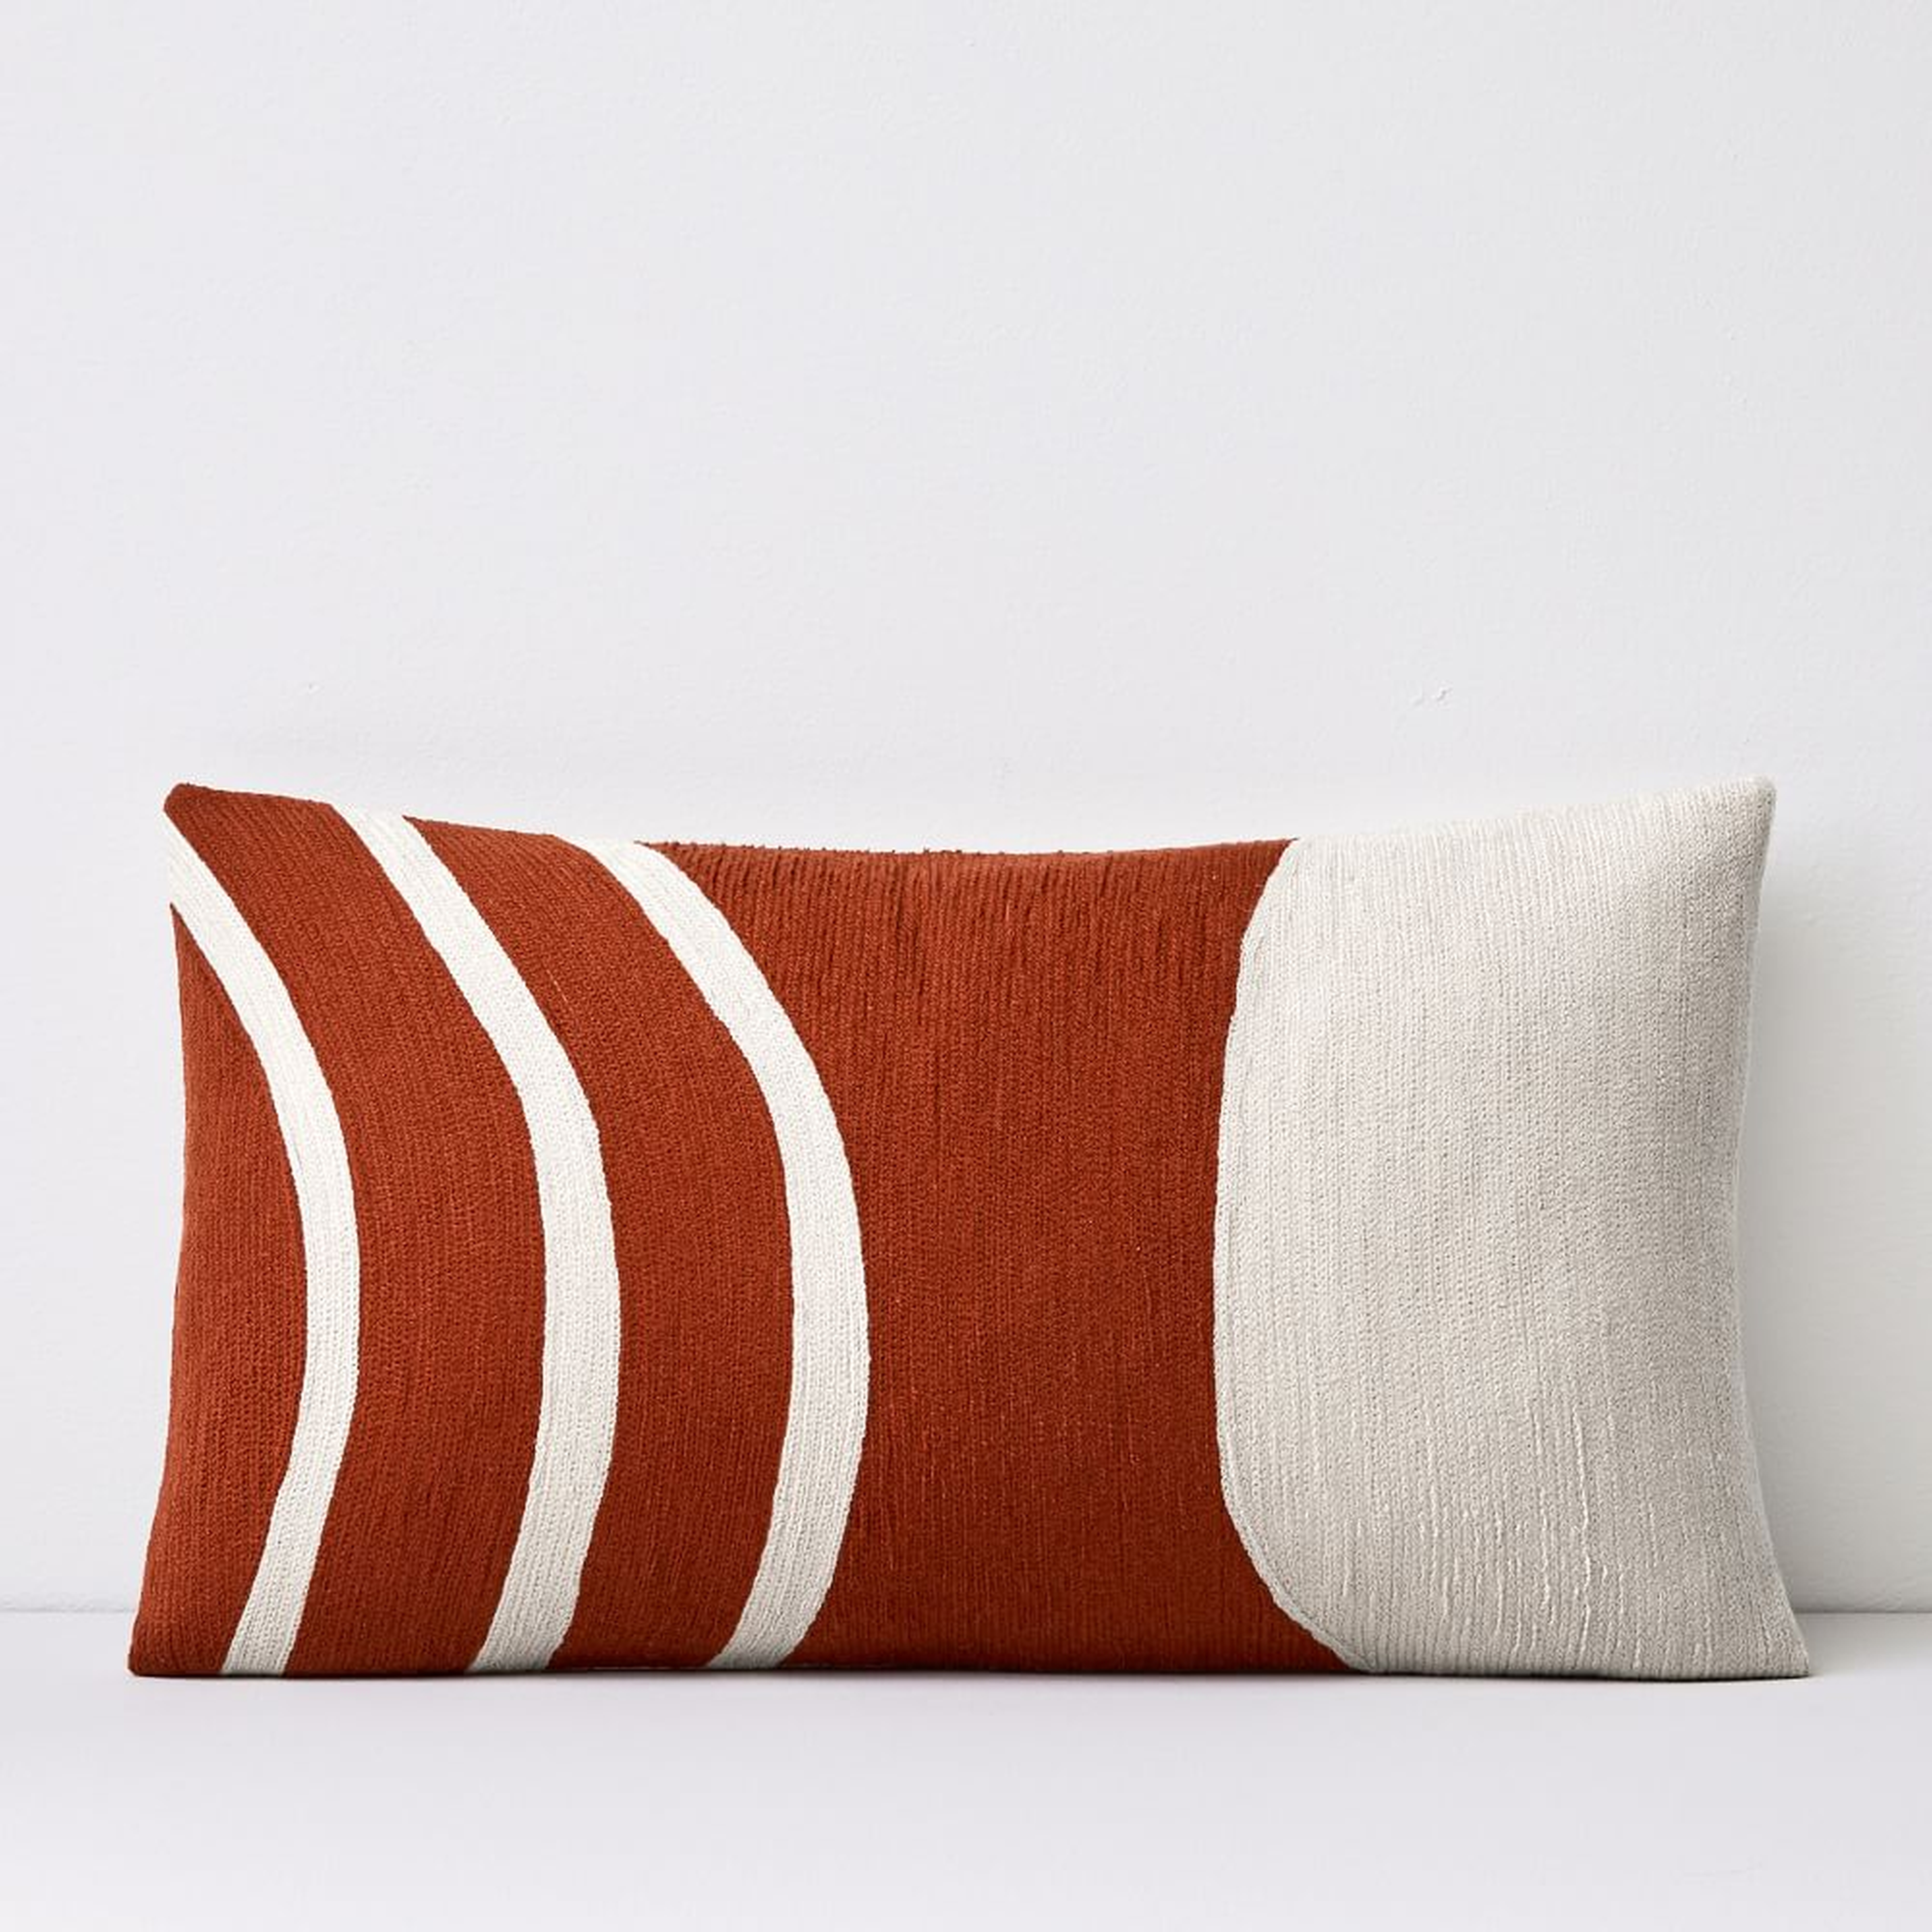 Crewel Rounded Pillow Cover, Copper, 12"x21" - West Elm